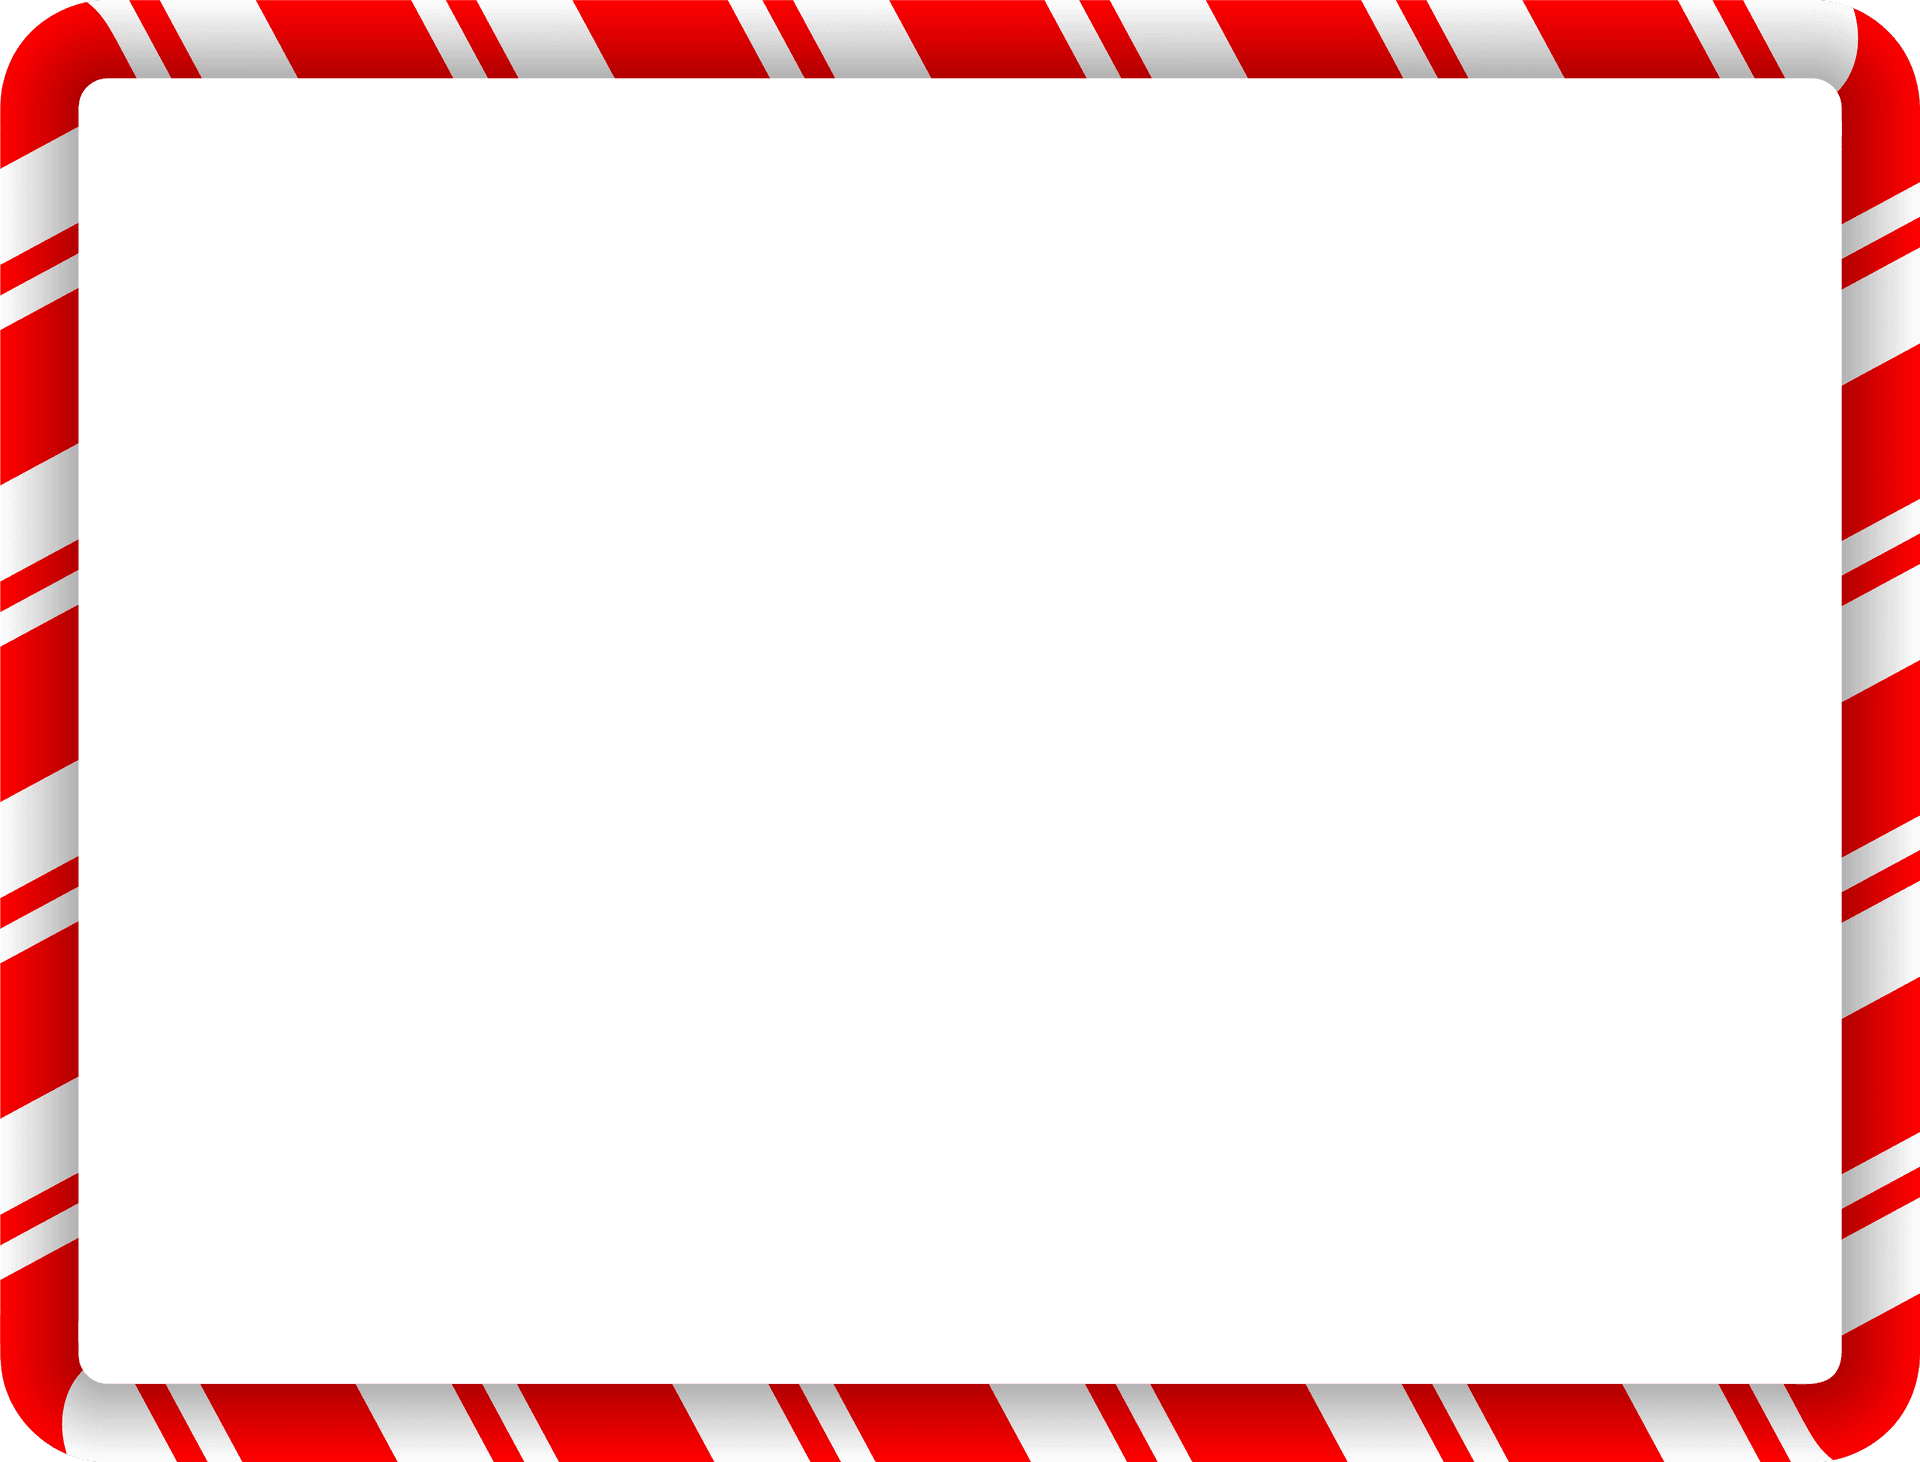 Redand White Candy Stripe Border Clipart PNG